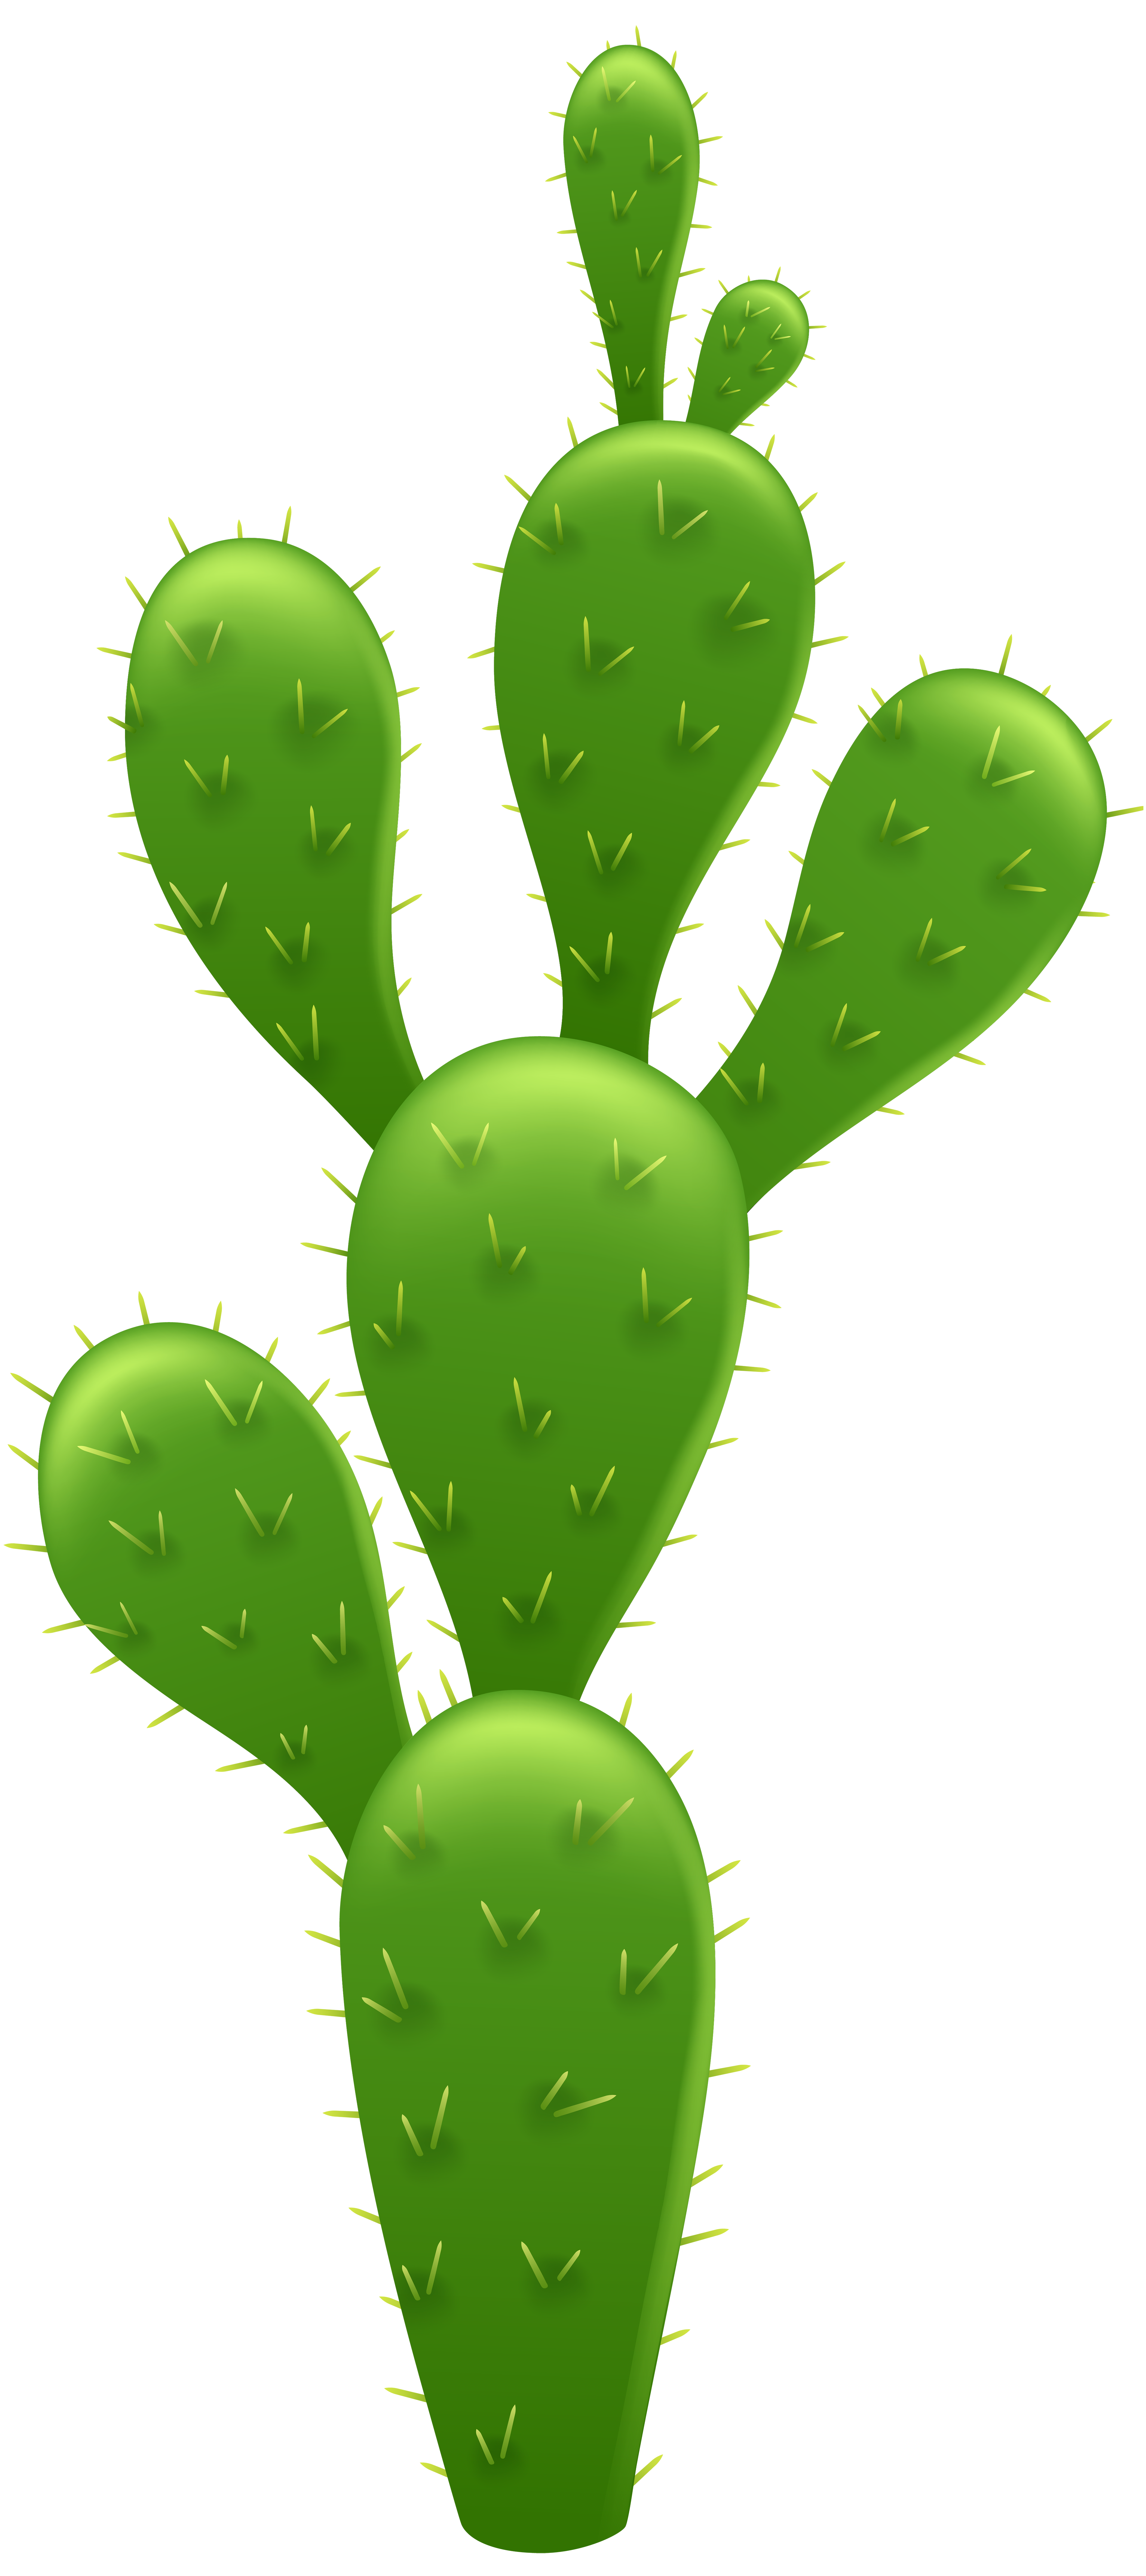 Cactus Transparent Png Clip Art Image Gallery Yopriceville High Quality Images And Transparent Png Free Clipart